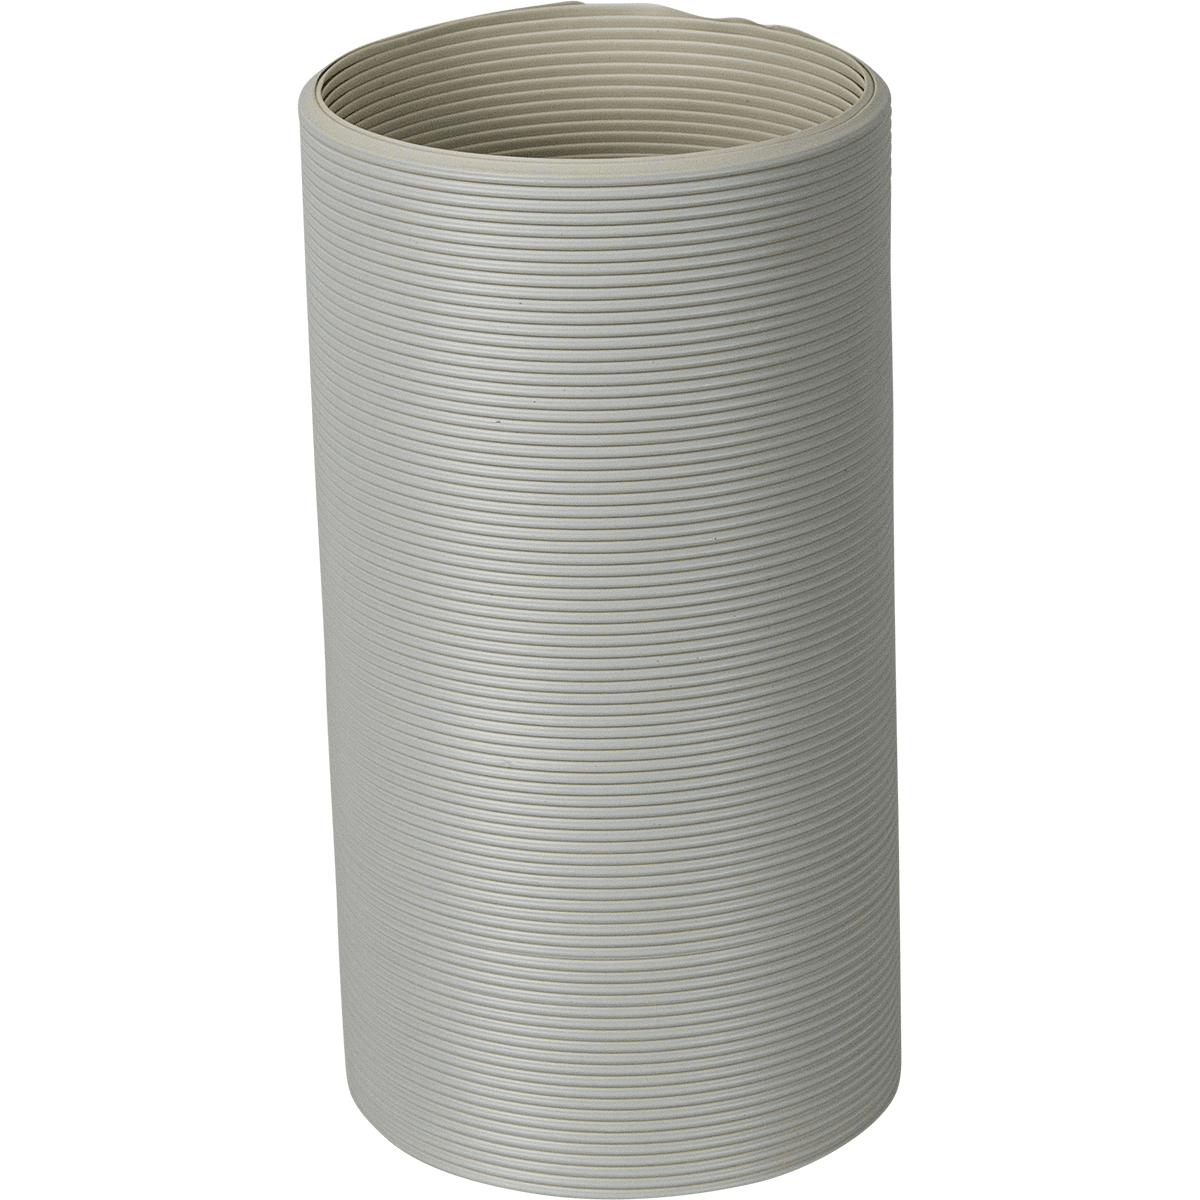 Honeywell Replacement Heat Exhaust Hose for MN1/MN4 Portable AC (A6200-480-BS)